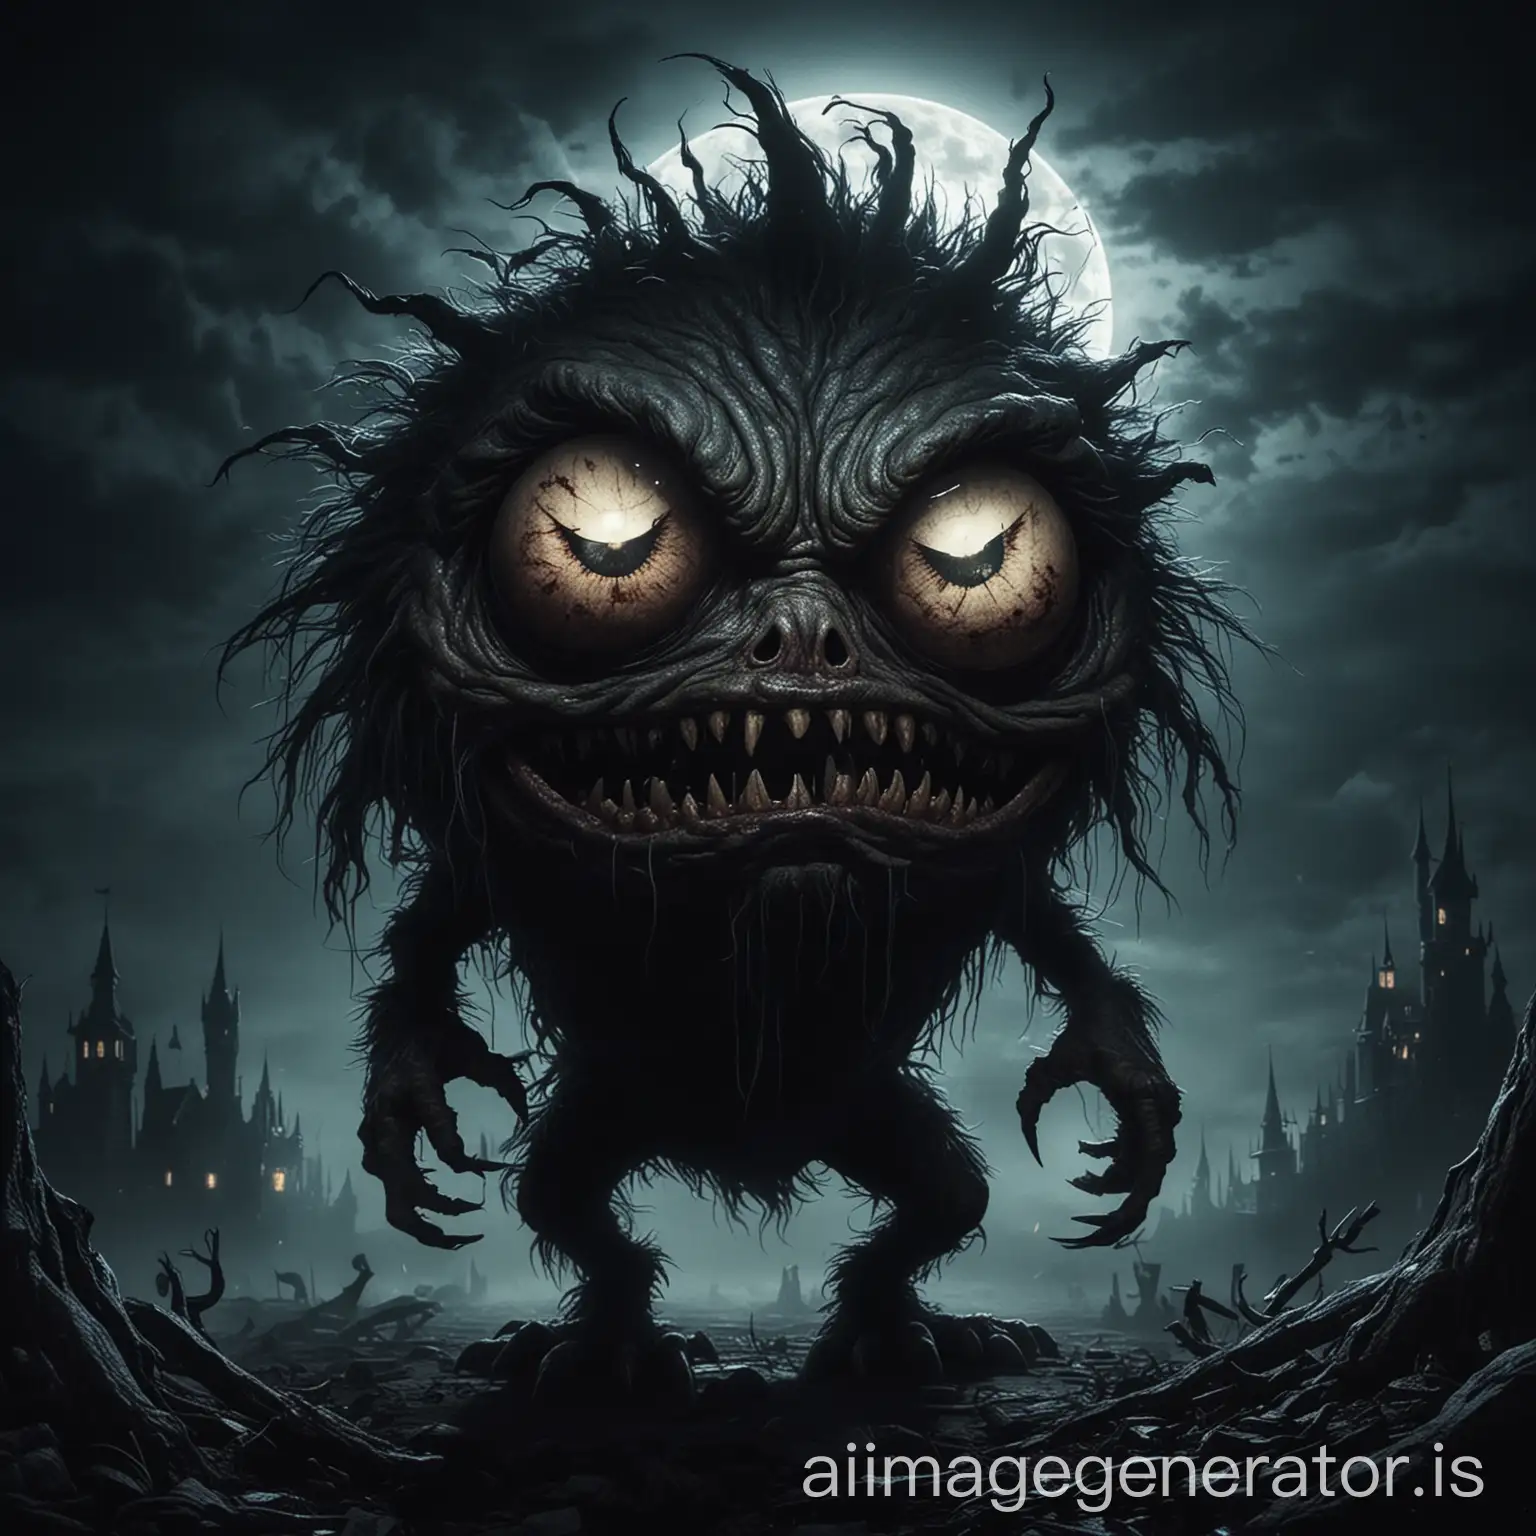 OneEyed-Nighttime-Monster-Sinister-Creature-Emerges-from-the-Darkness